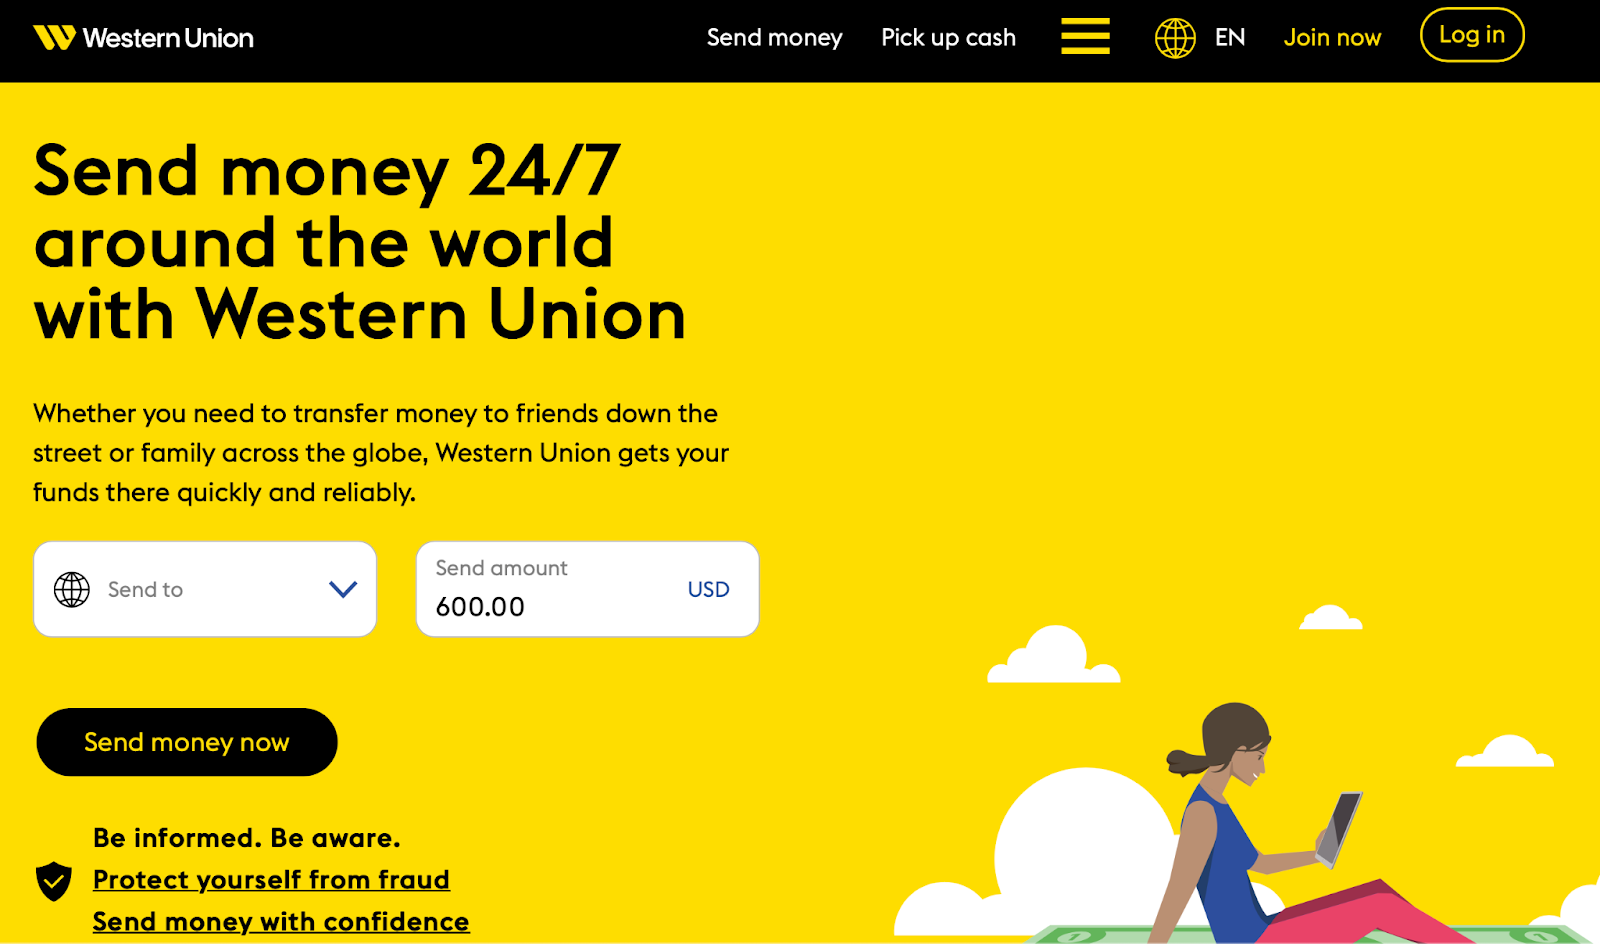 Did you use Western Union to pay a scammer?